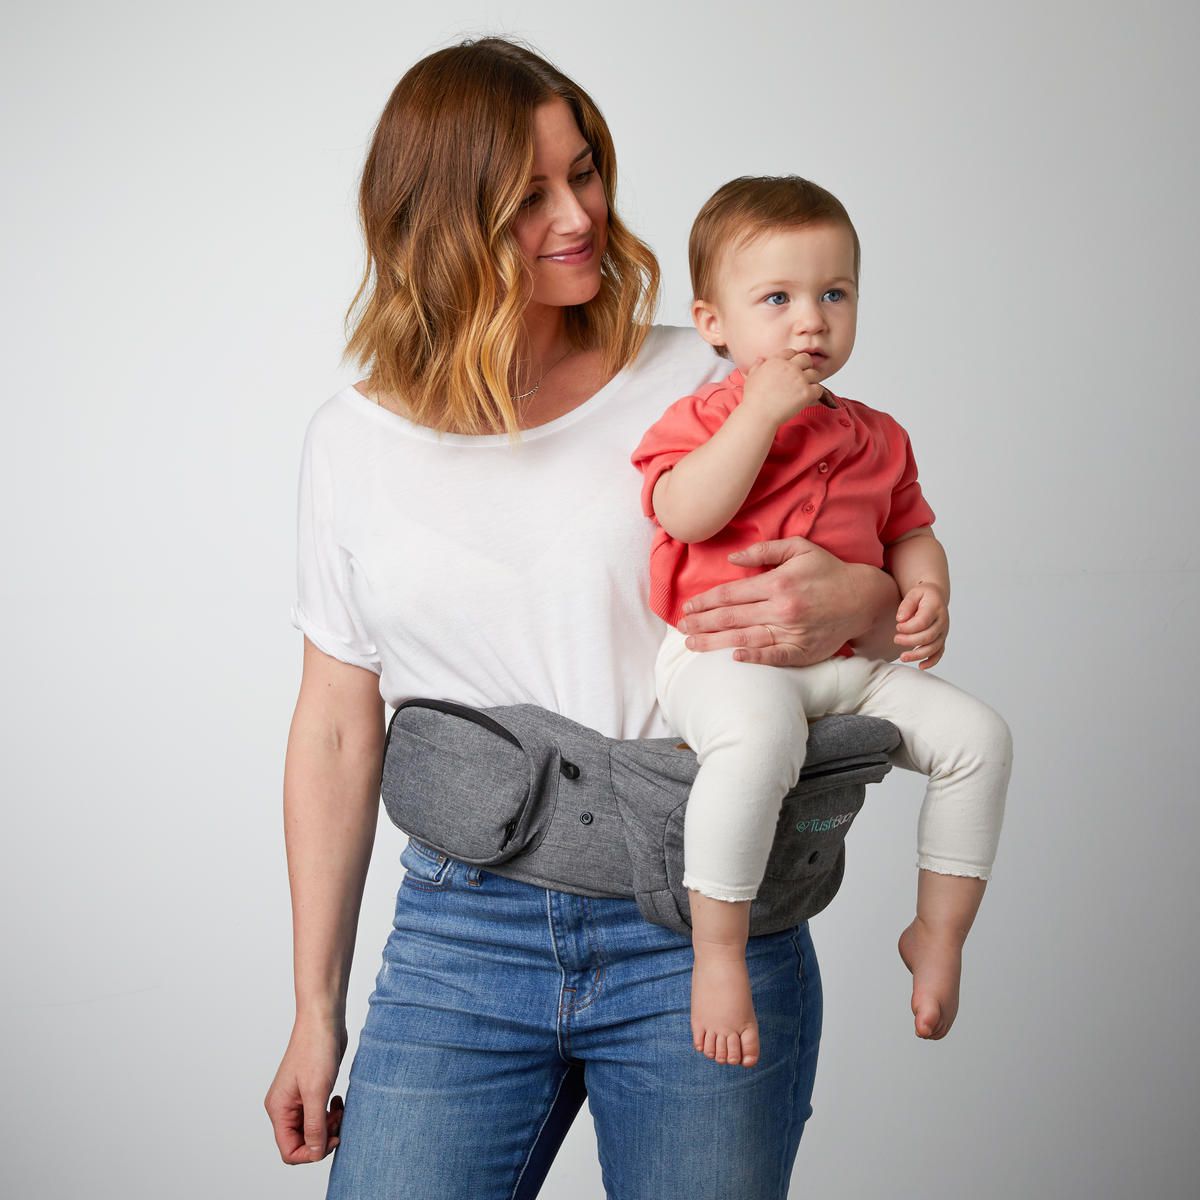 front and hip baby carriers